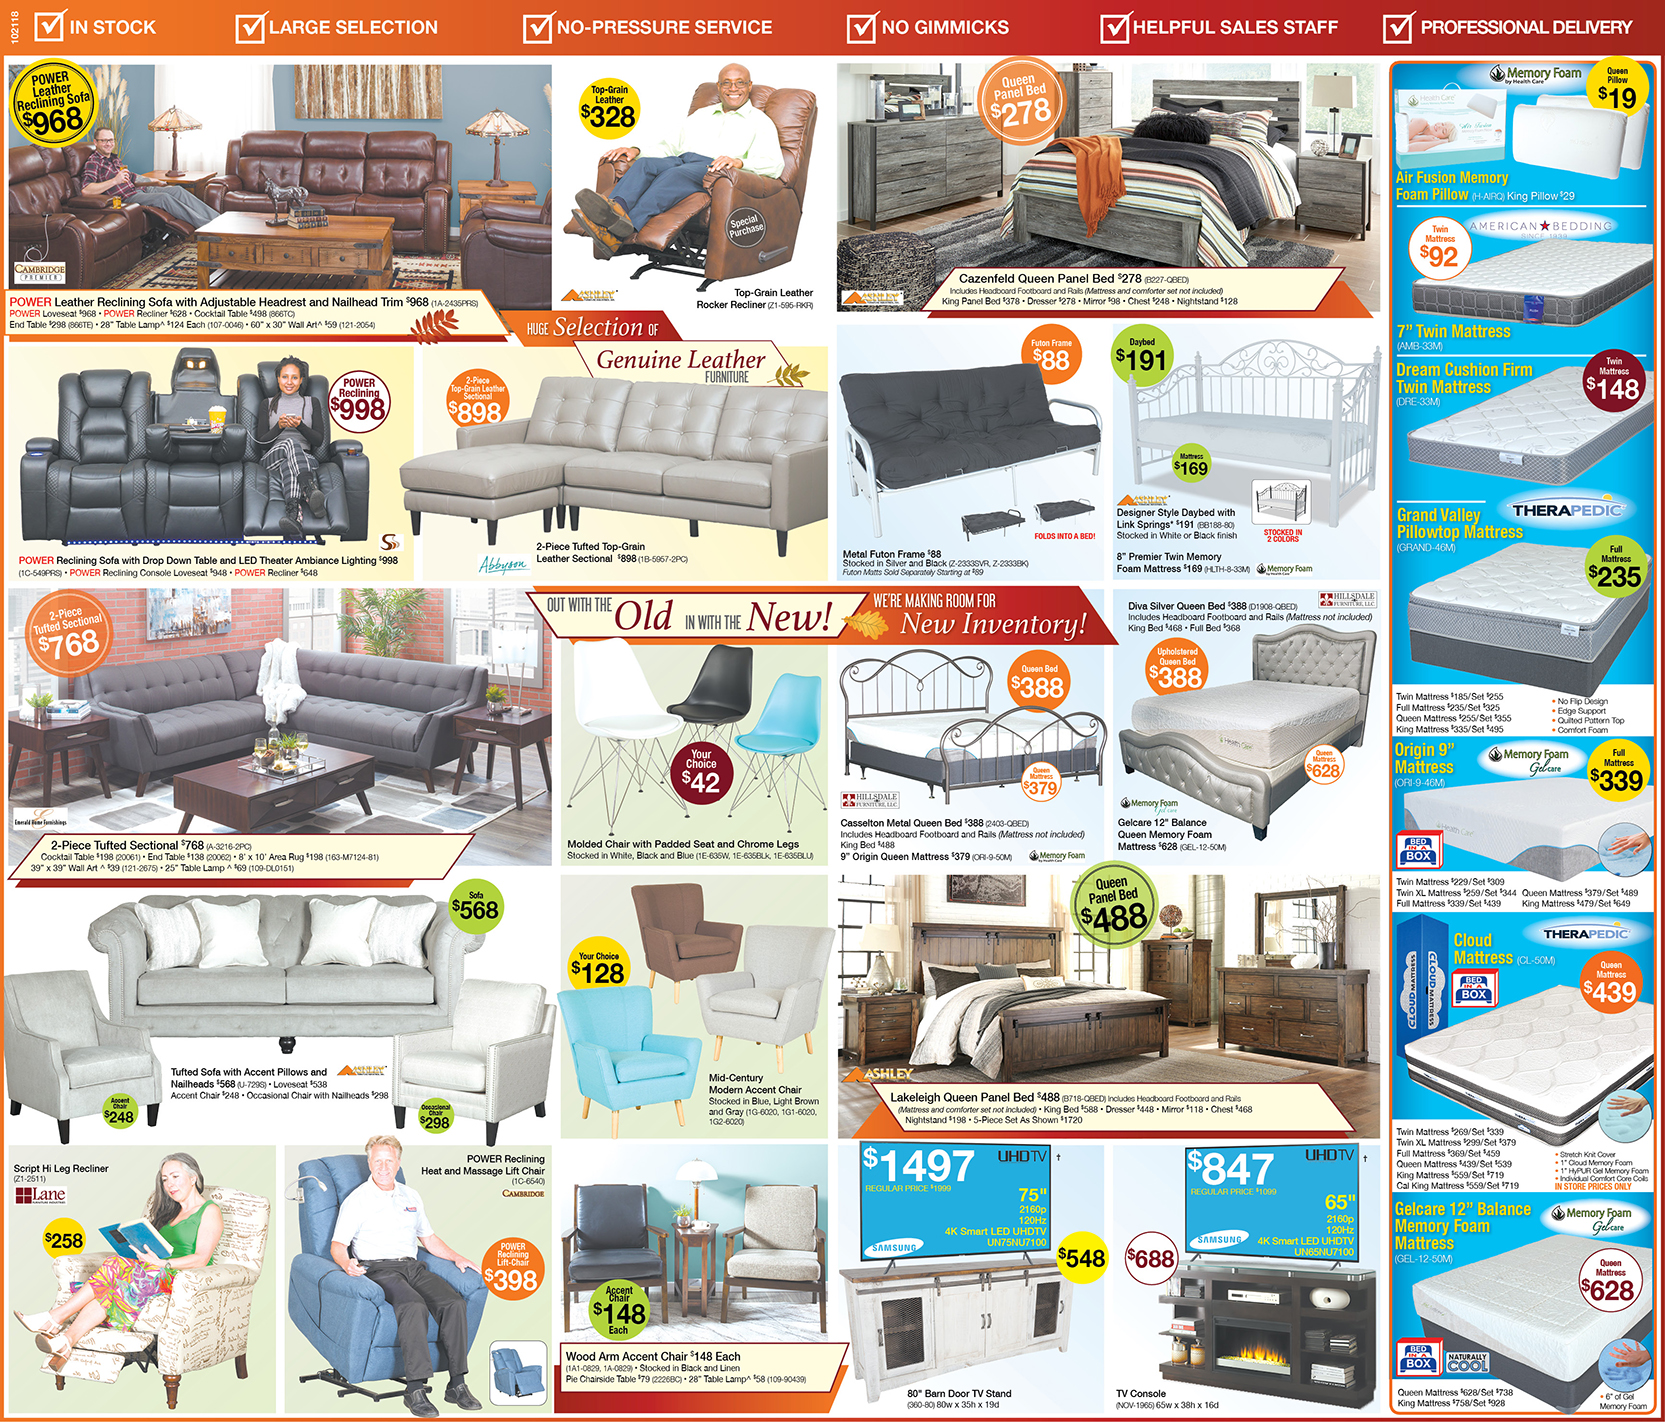 Fall Clearance Event Savings Ad for Sleeper Sofas, Beds, Patio Furniture & More | Best Prices on living room furniture